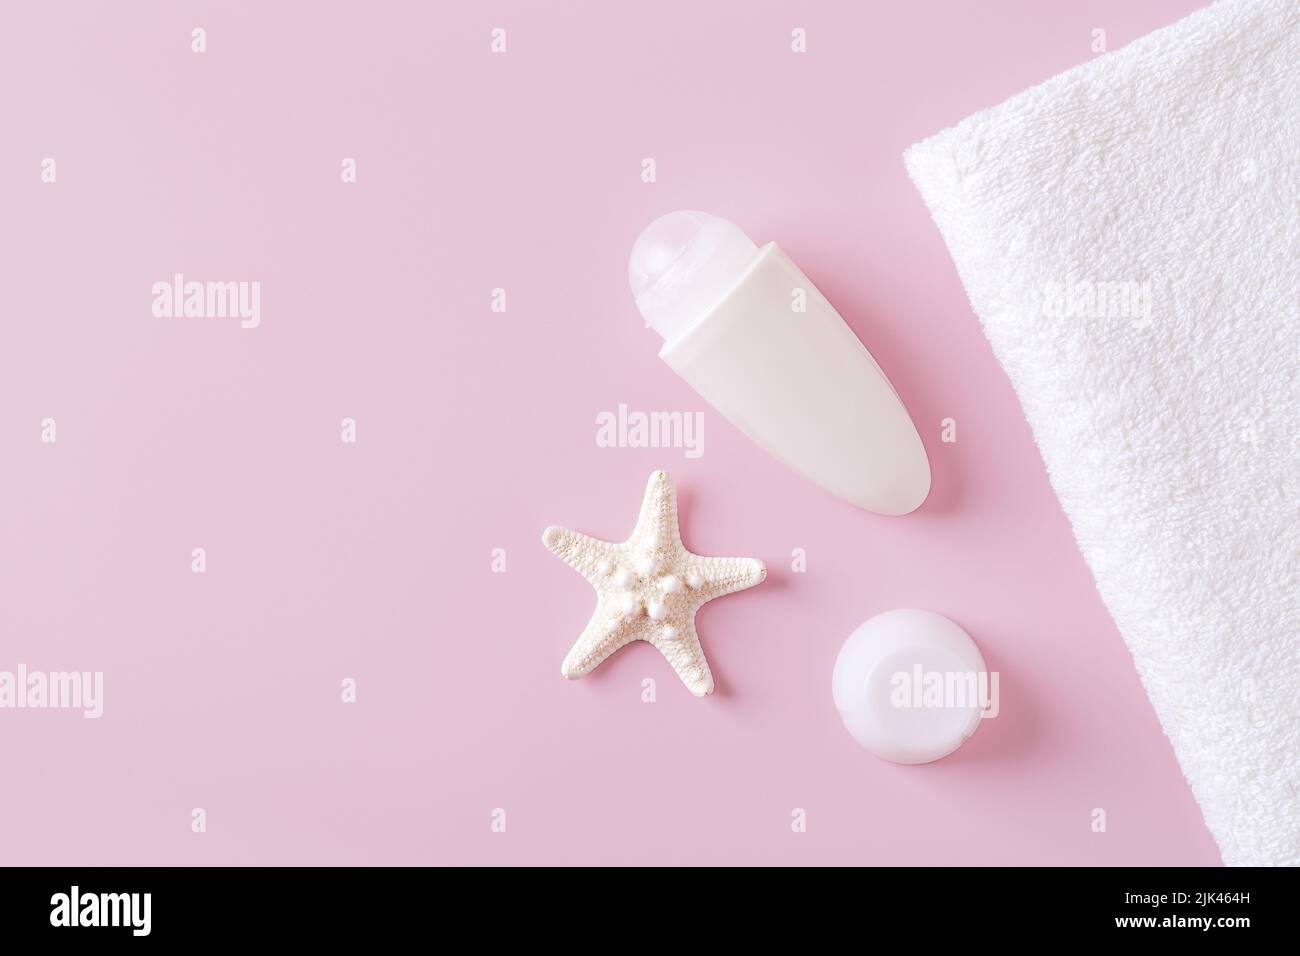 Roll on antiperspirant deodorant, bath towel and sea star on a pastel pink background. Concept of body care, toiletries and natural cosmetics. Stock Photo